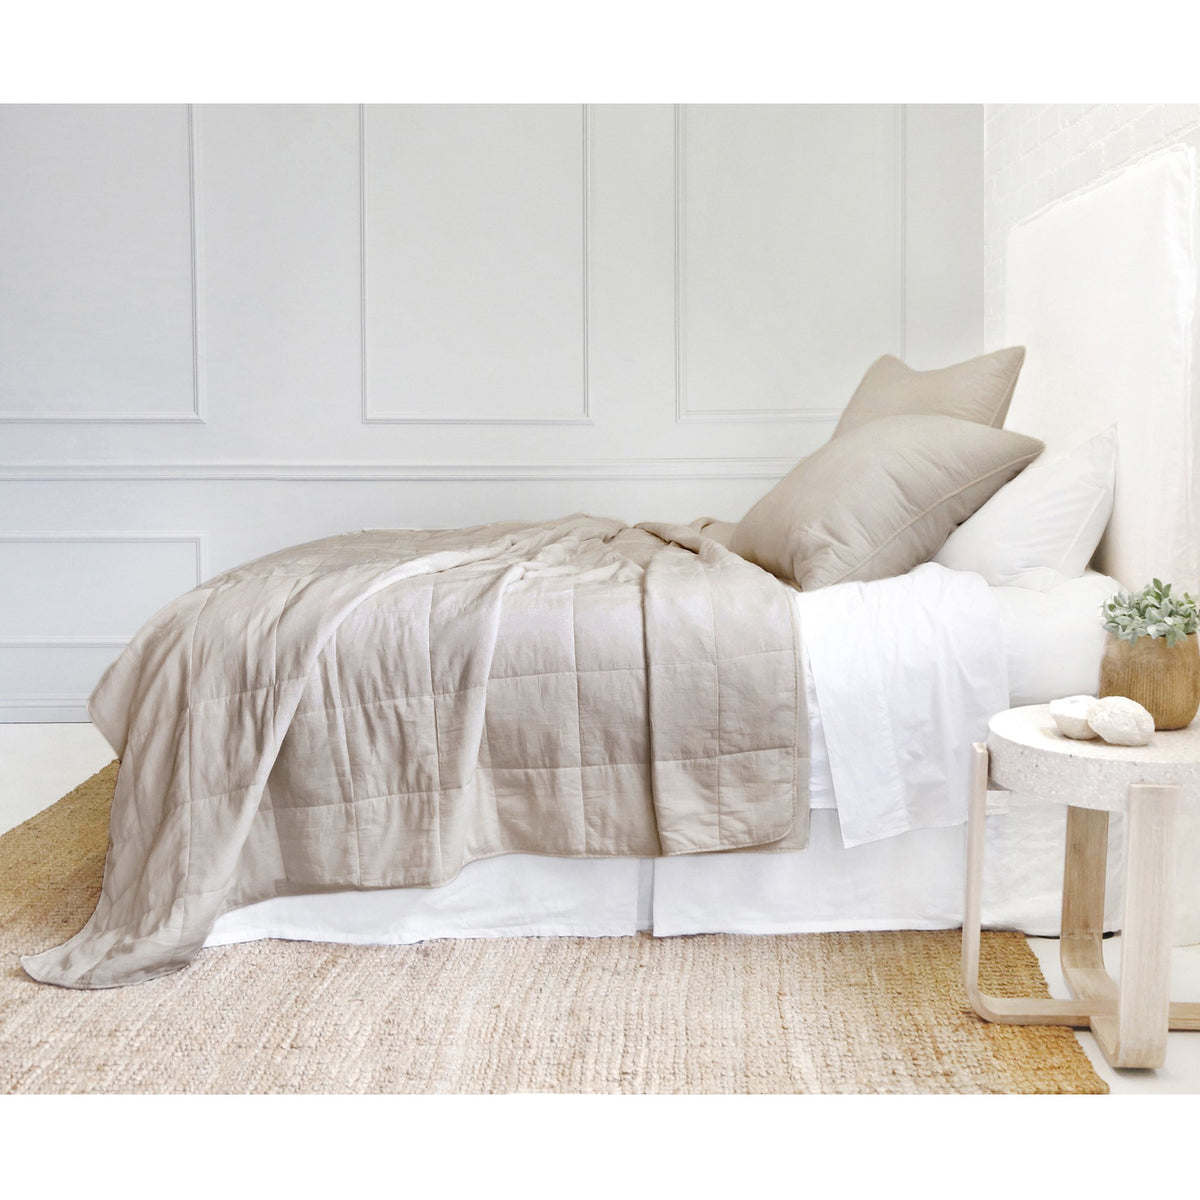 POM POM ANTWERP COVERLET COLLECTION - NATURAL